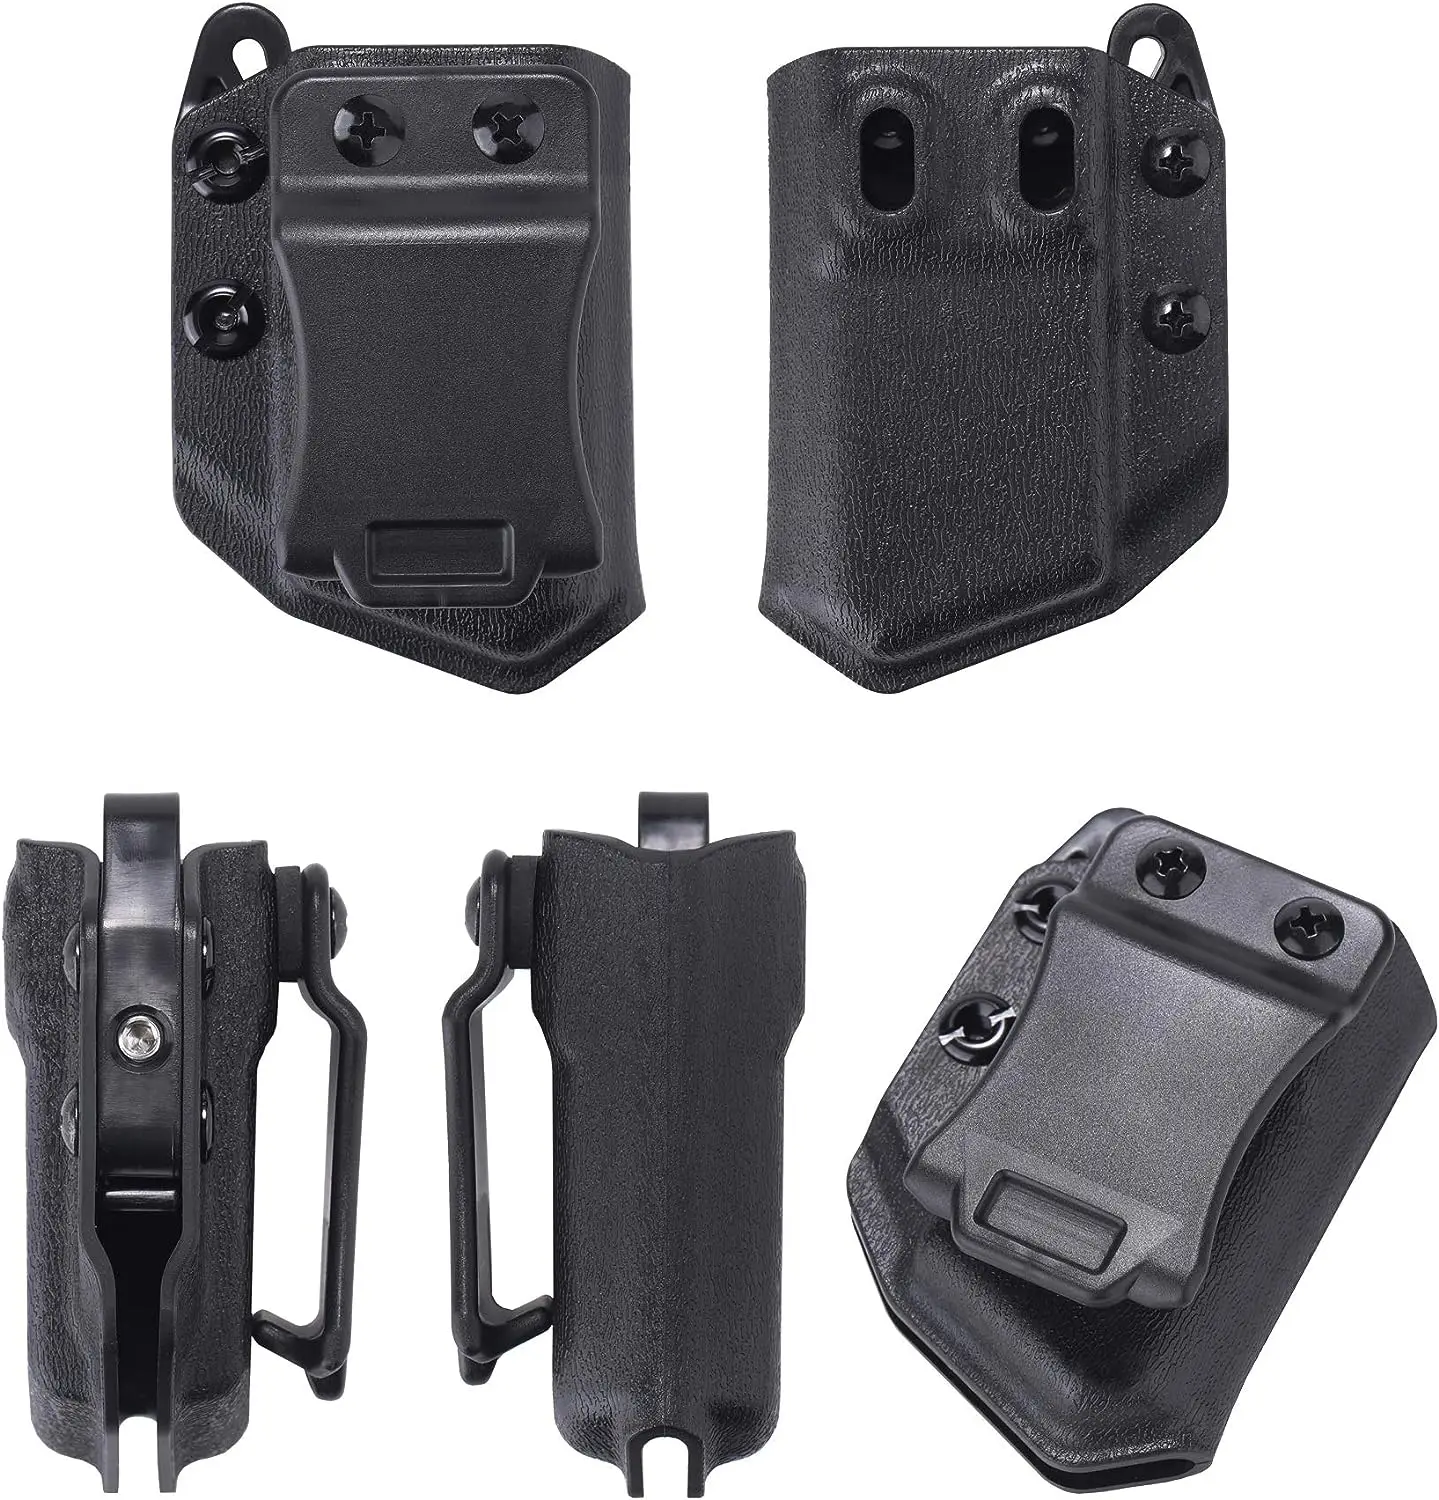 

IWB/OWB 9mm/.40 Double Stack Magazine Pouch for Glock CZ S&W H&K SIG P365 Pistol MAg Magazine Case Airsoft Hunting Gear